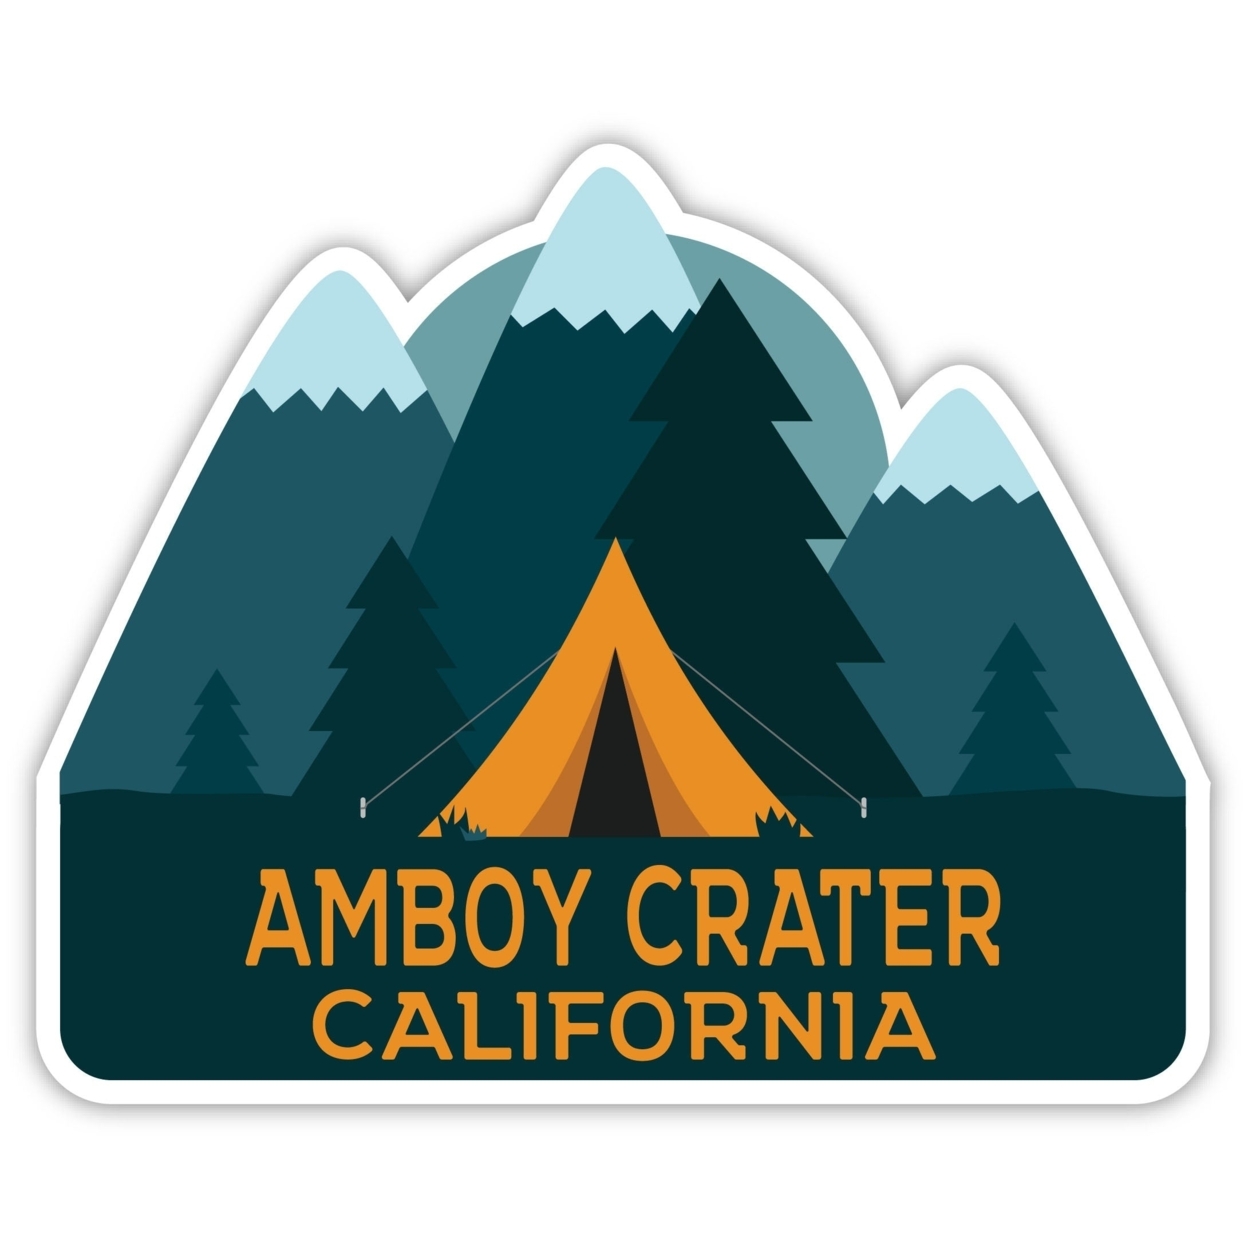 Amboy Crater California Souvenir Decorative Stickers (Choose Theme And Size) - 4-Pack, 6-Inch, Tent